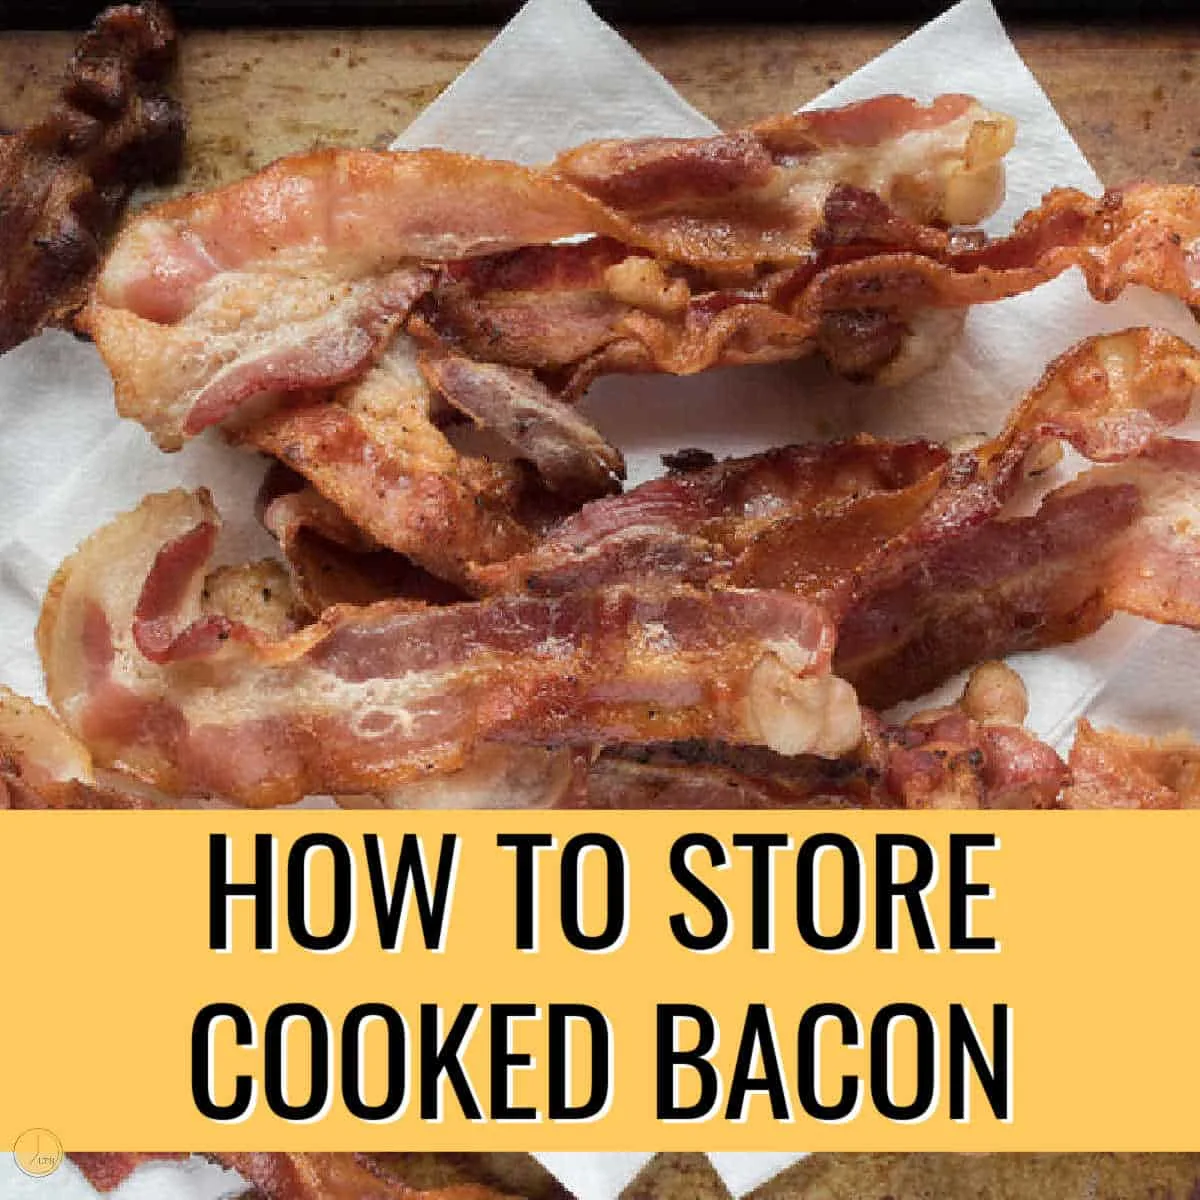 Store leftover bacon